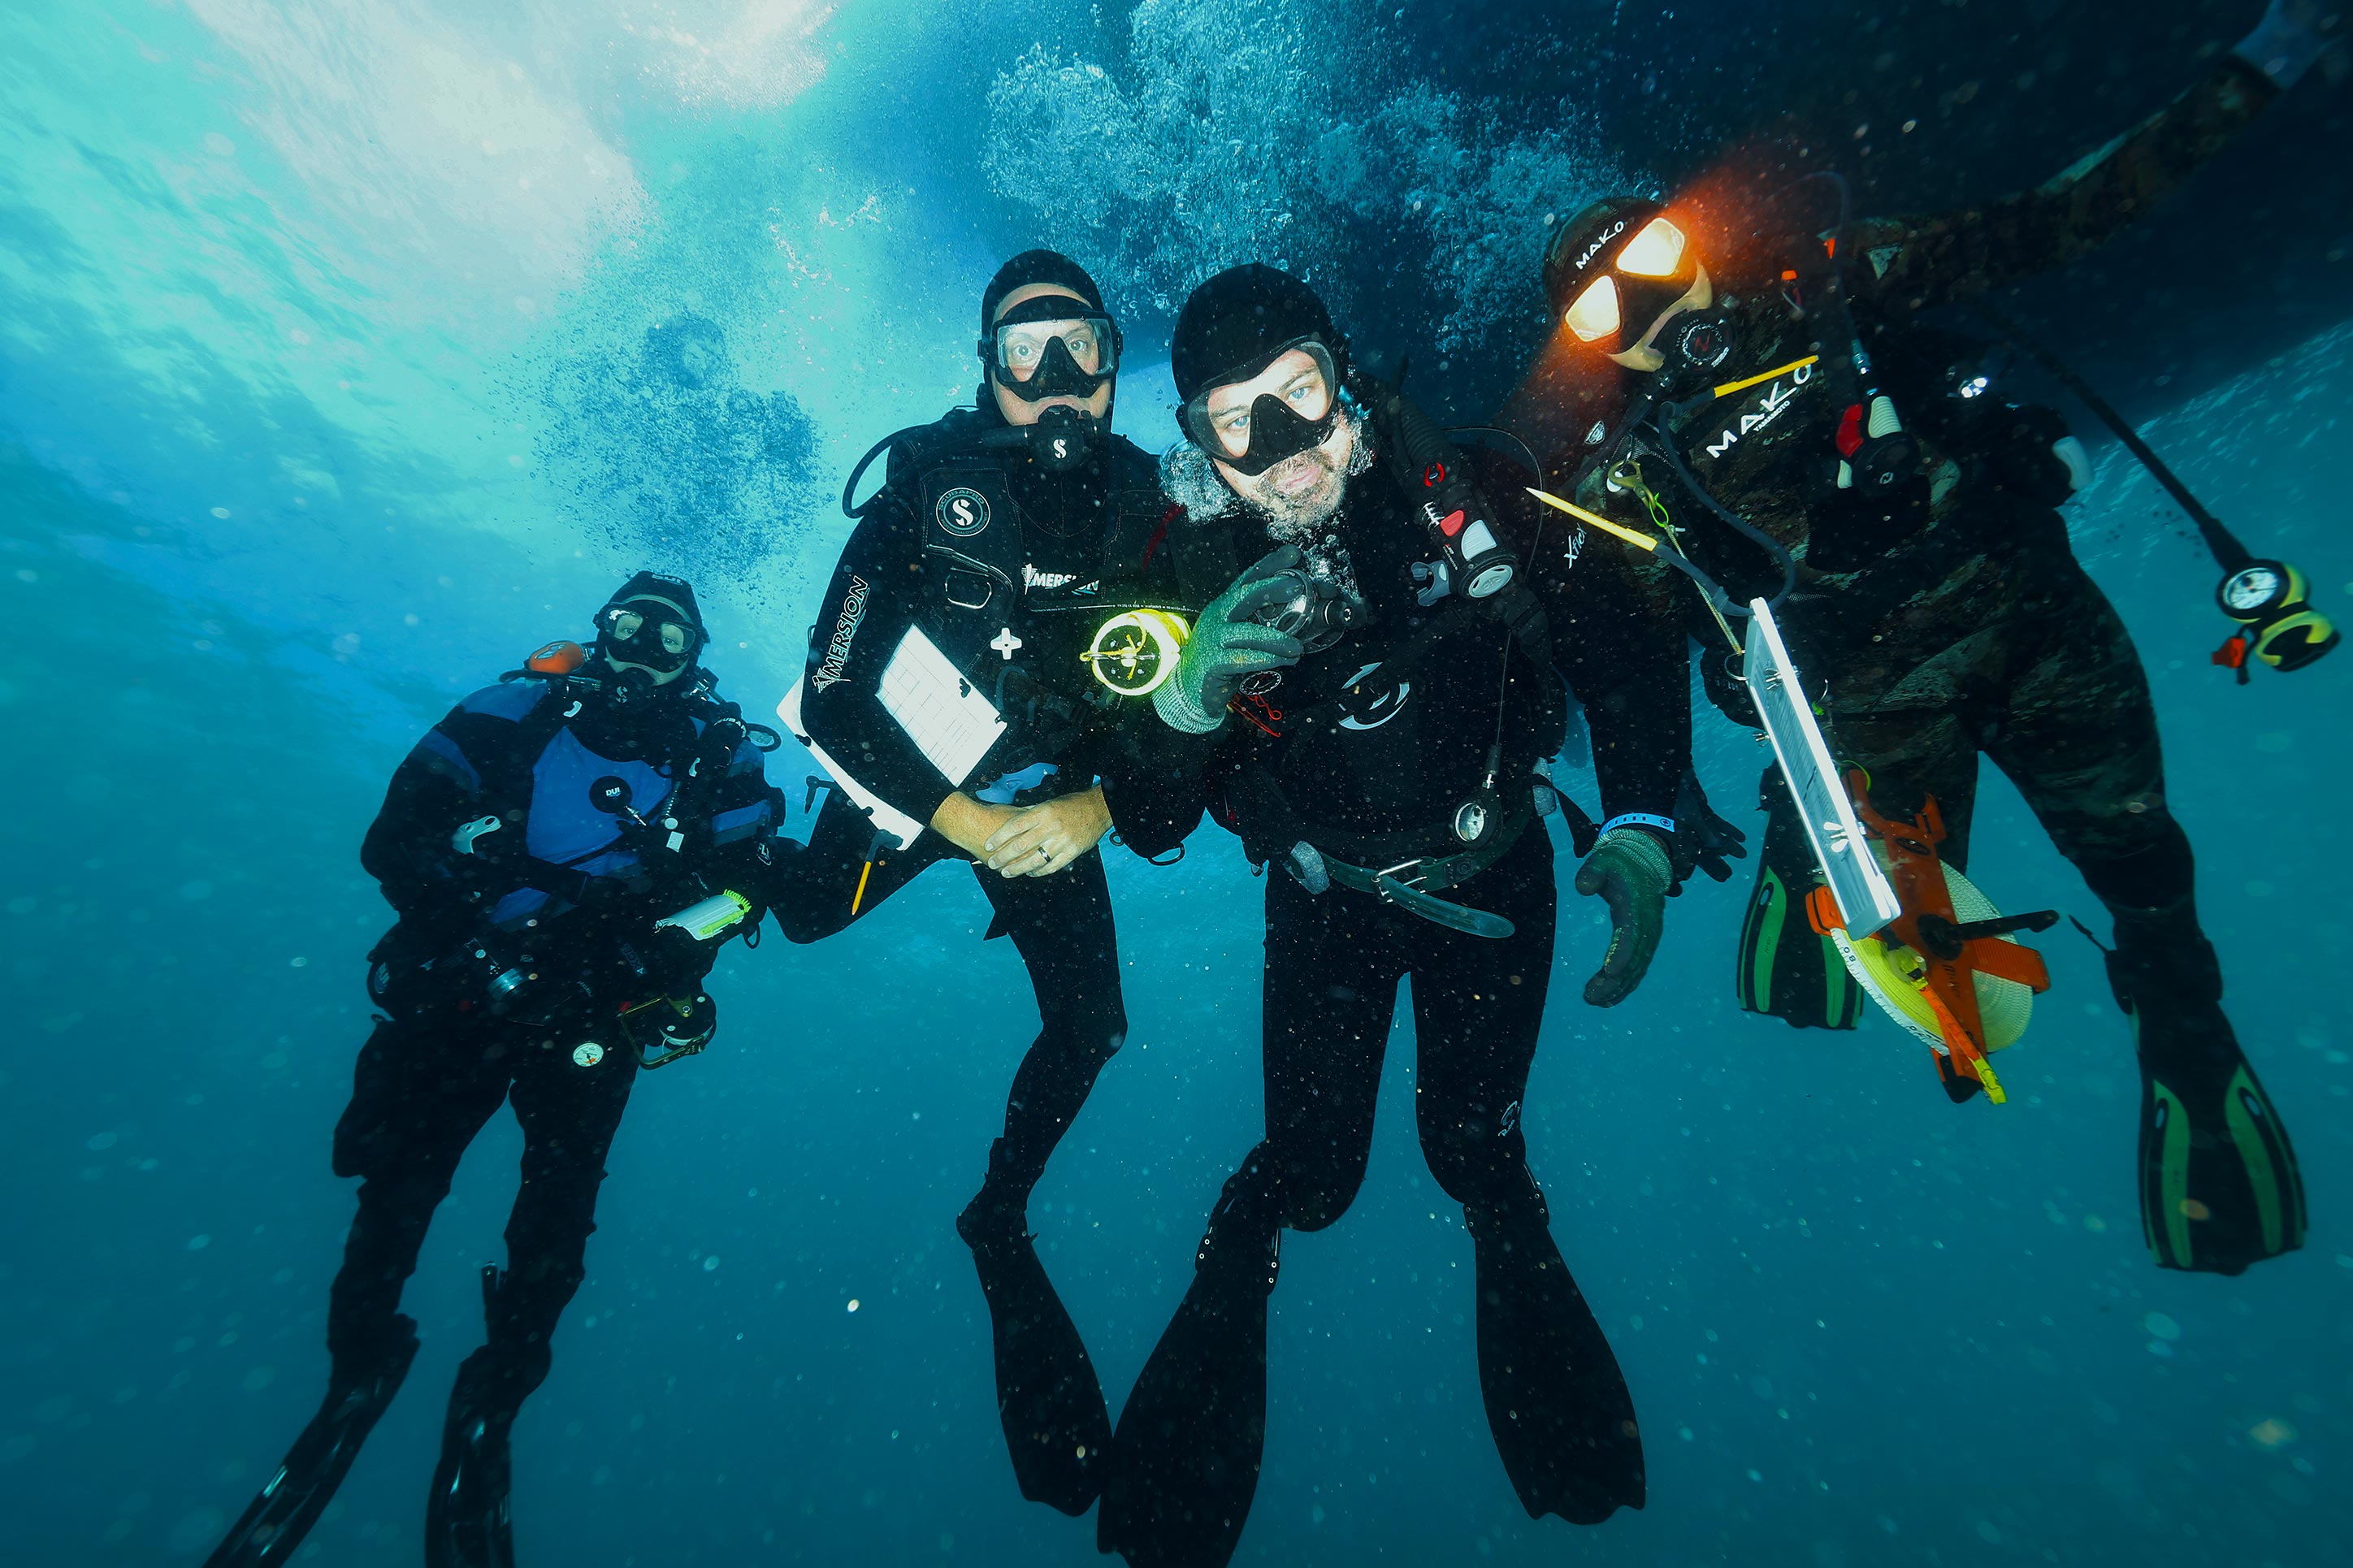 Group of MSI divers strike a pose